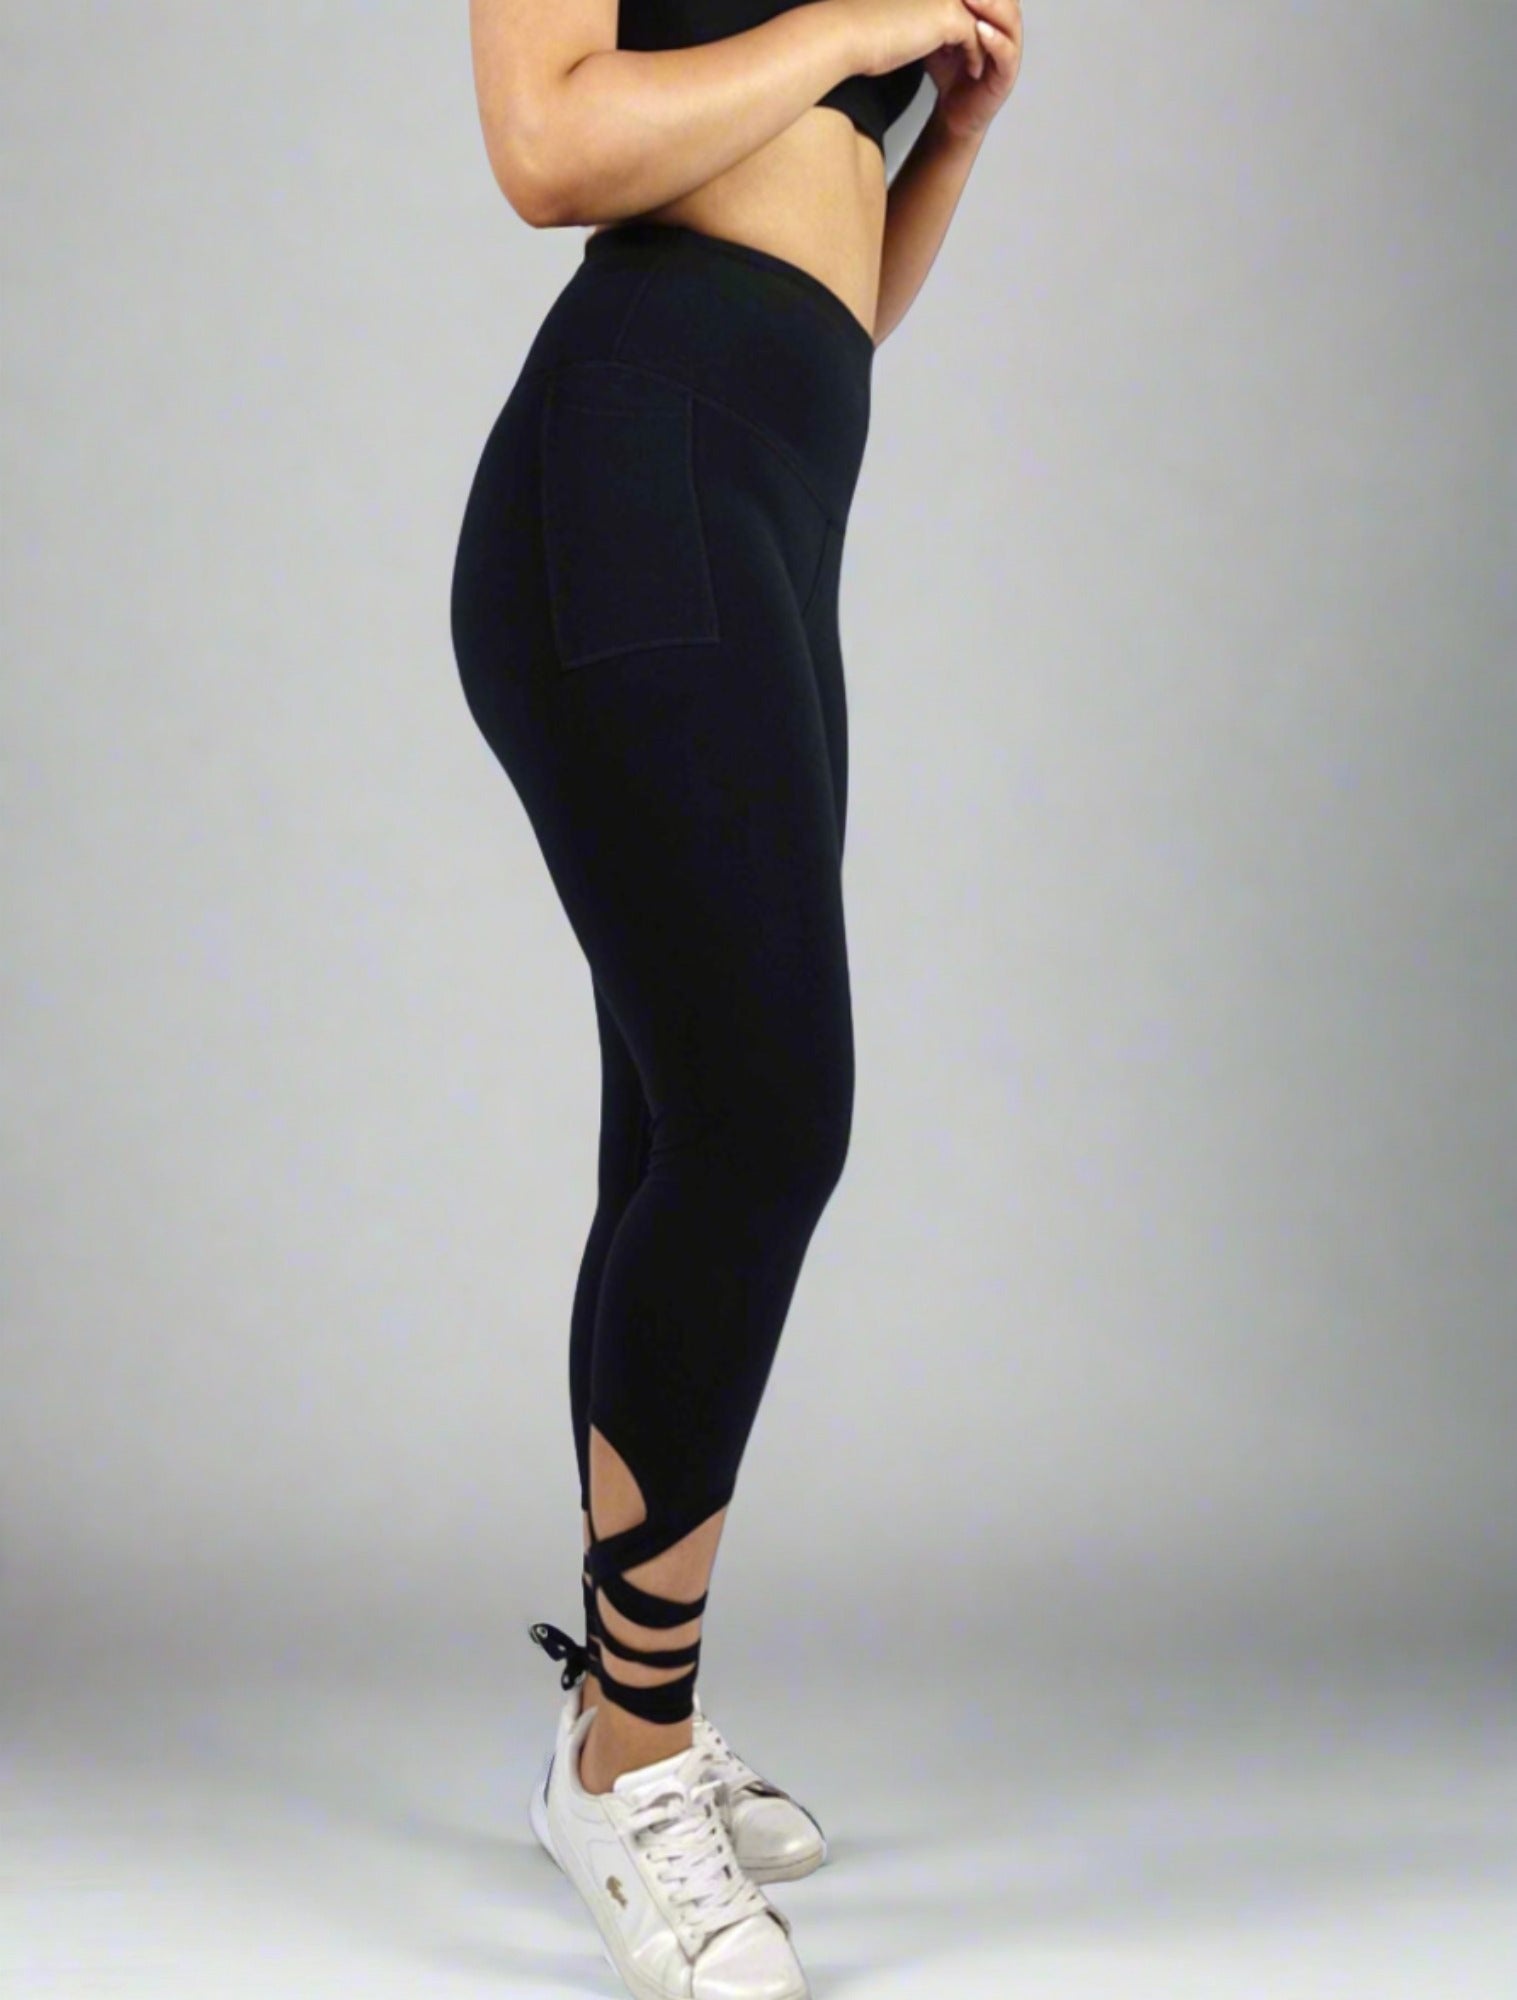 Make leggings your go-to look... - Fashion Bug Online Store | Facebook